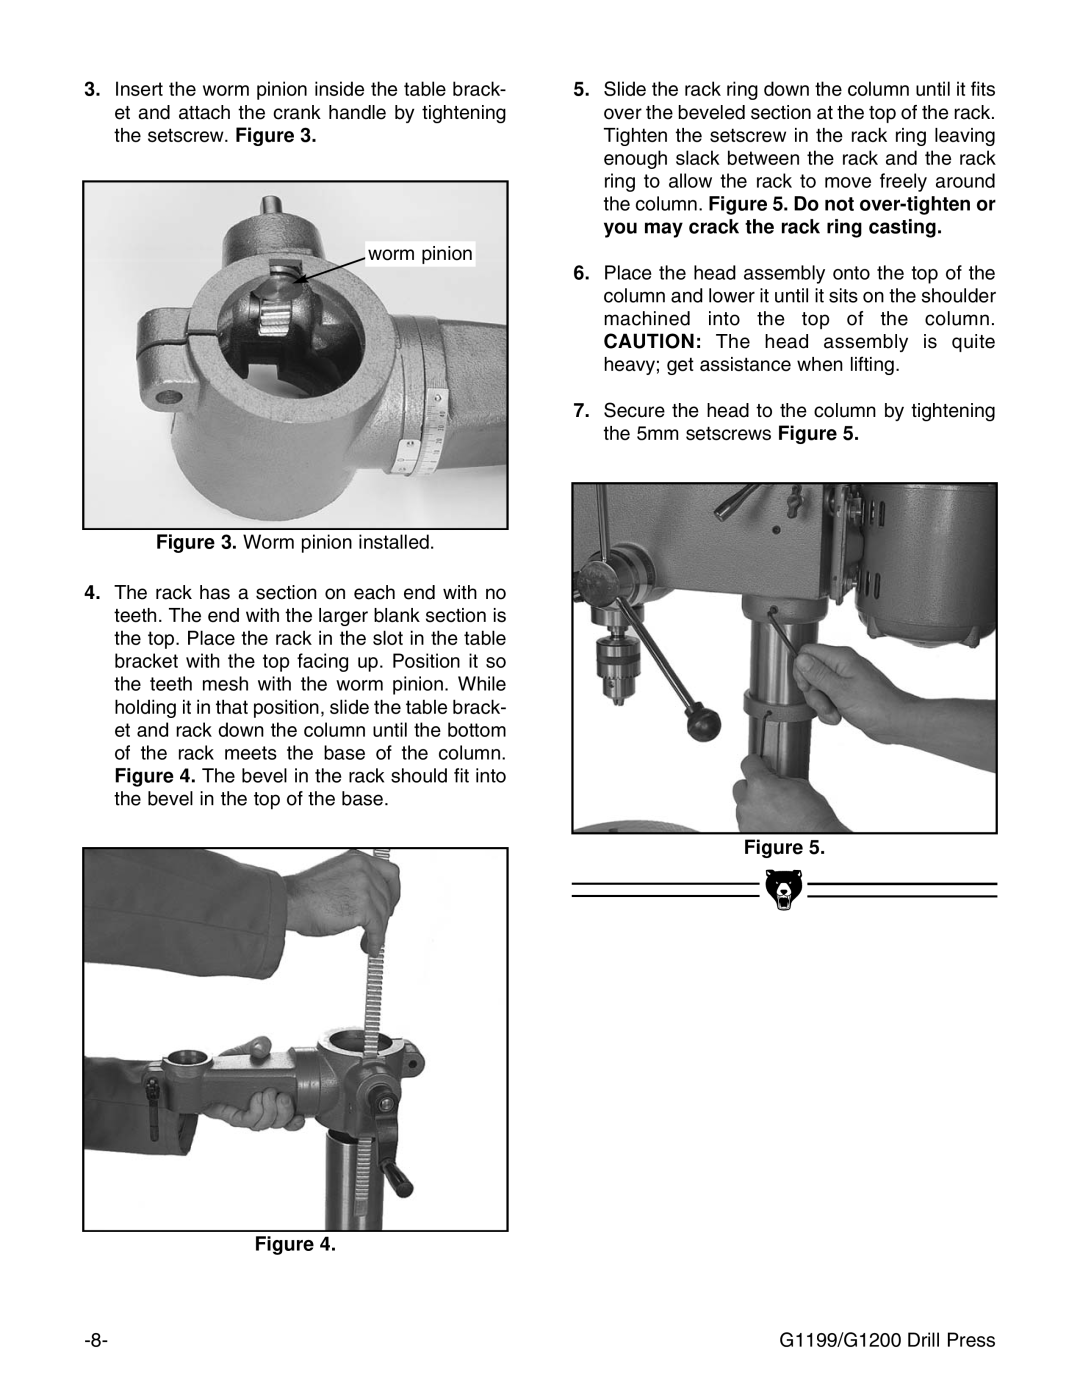 Grizzly instruction manual worm pinion . Worm pinion installed, G1199/G1200 Drill Press 